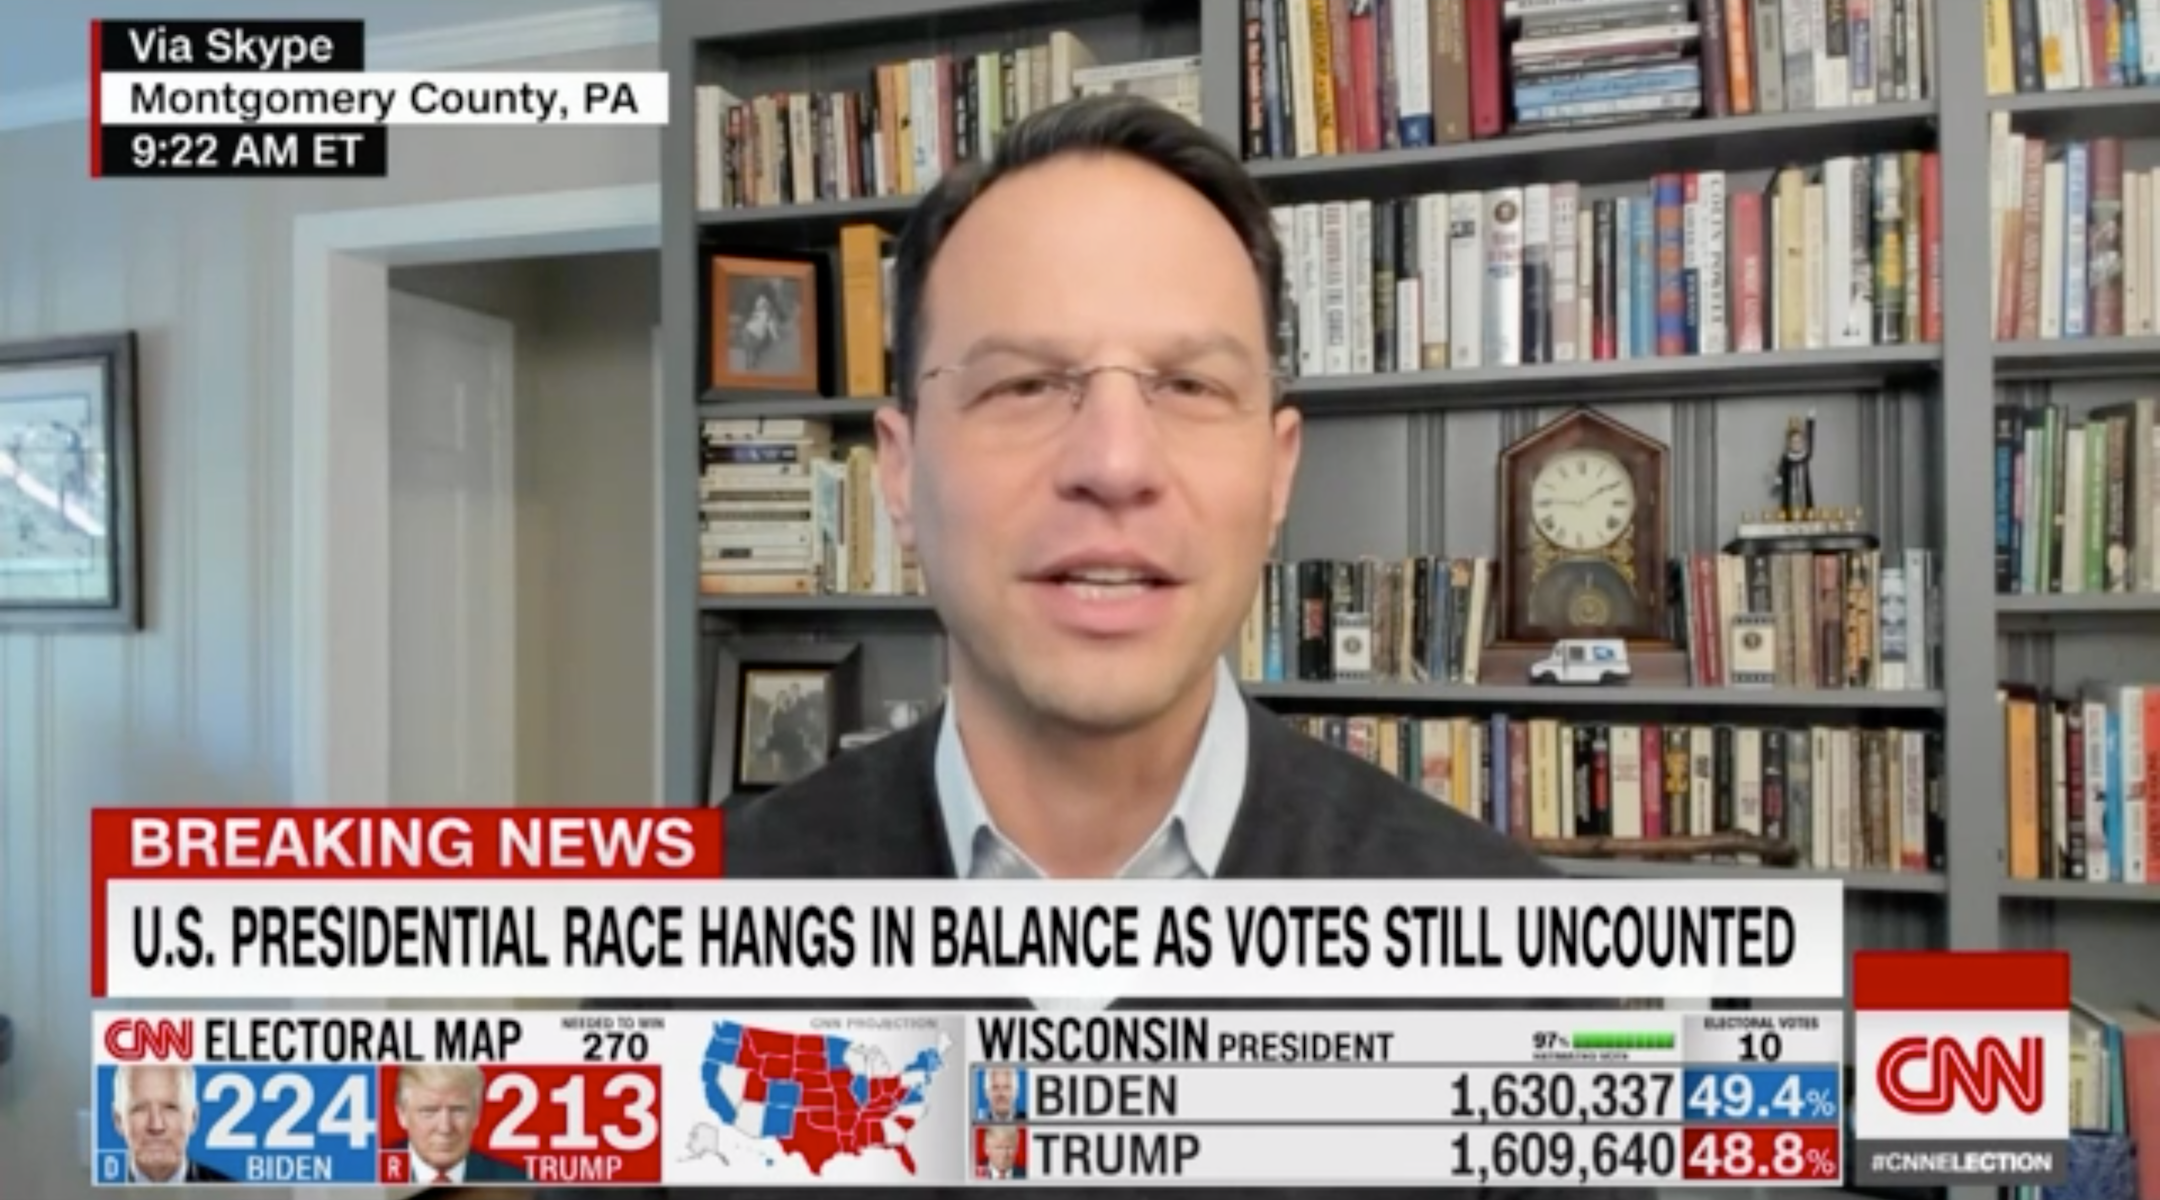 Pennsylvania Attorney General Josh Shapiro appears on CNN on November 4 to discuss vote counting in Pennsylvania. (Screenshot)